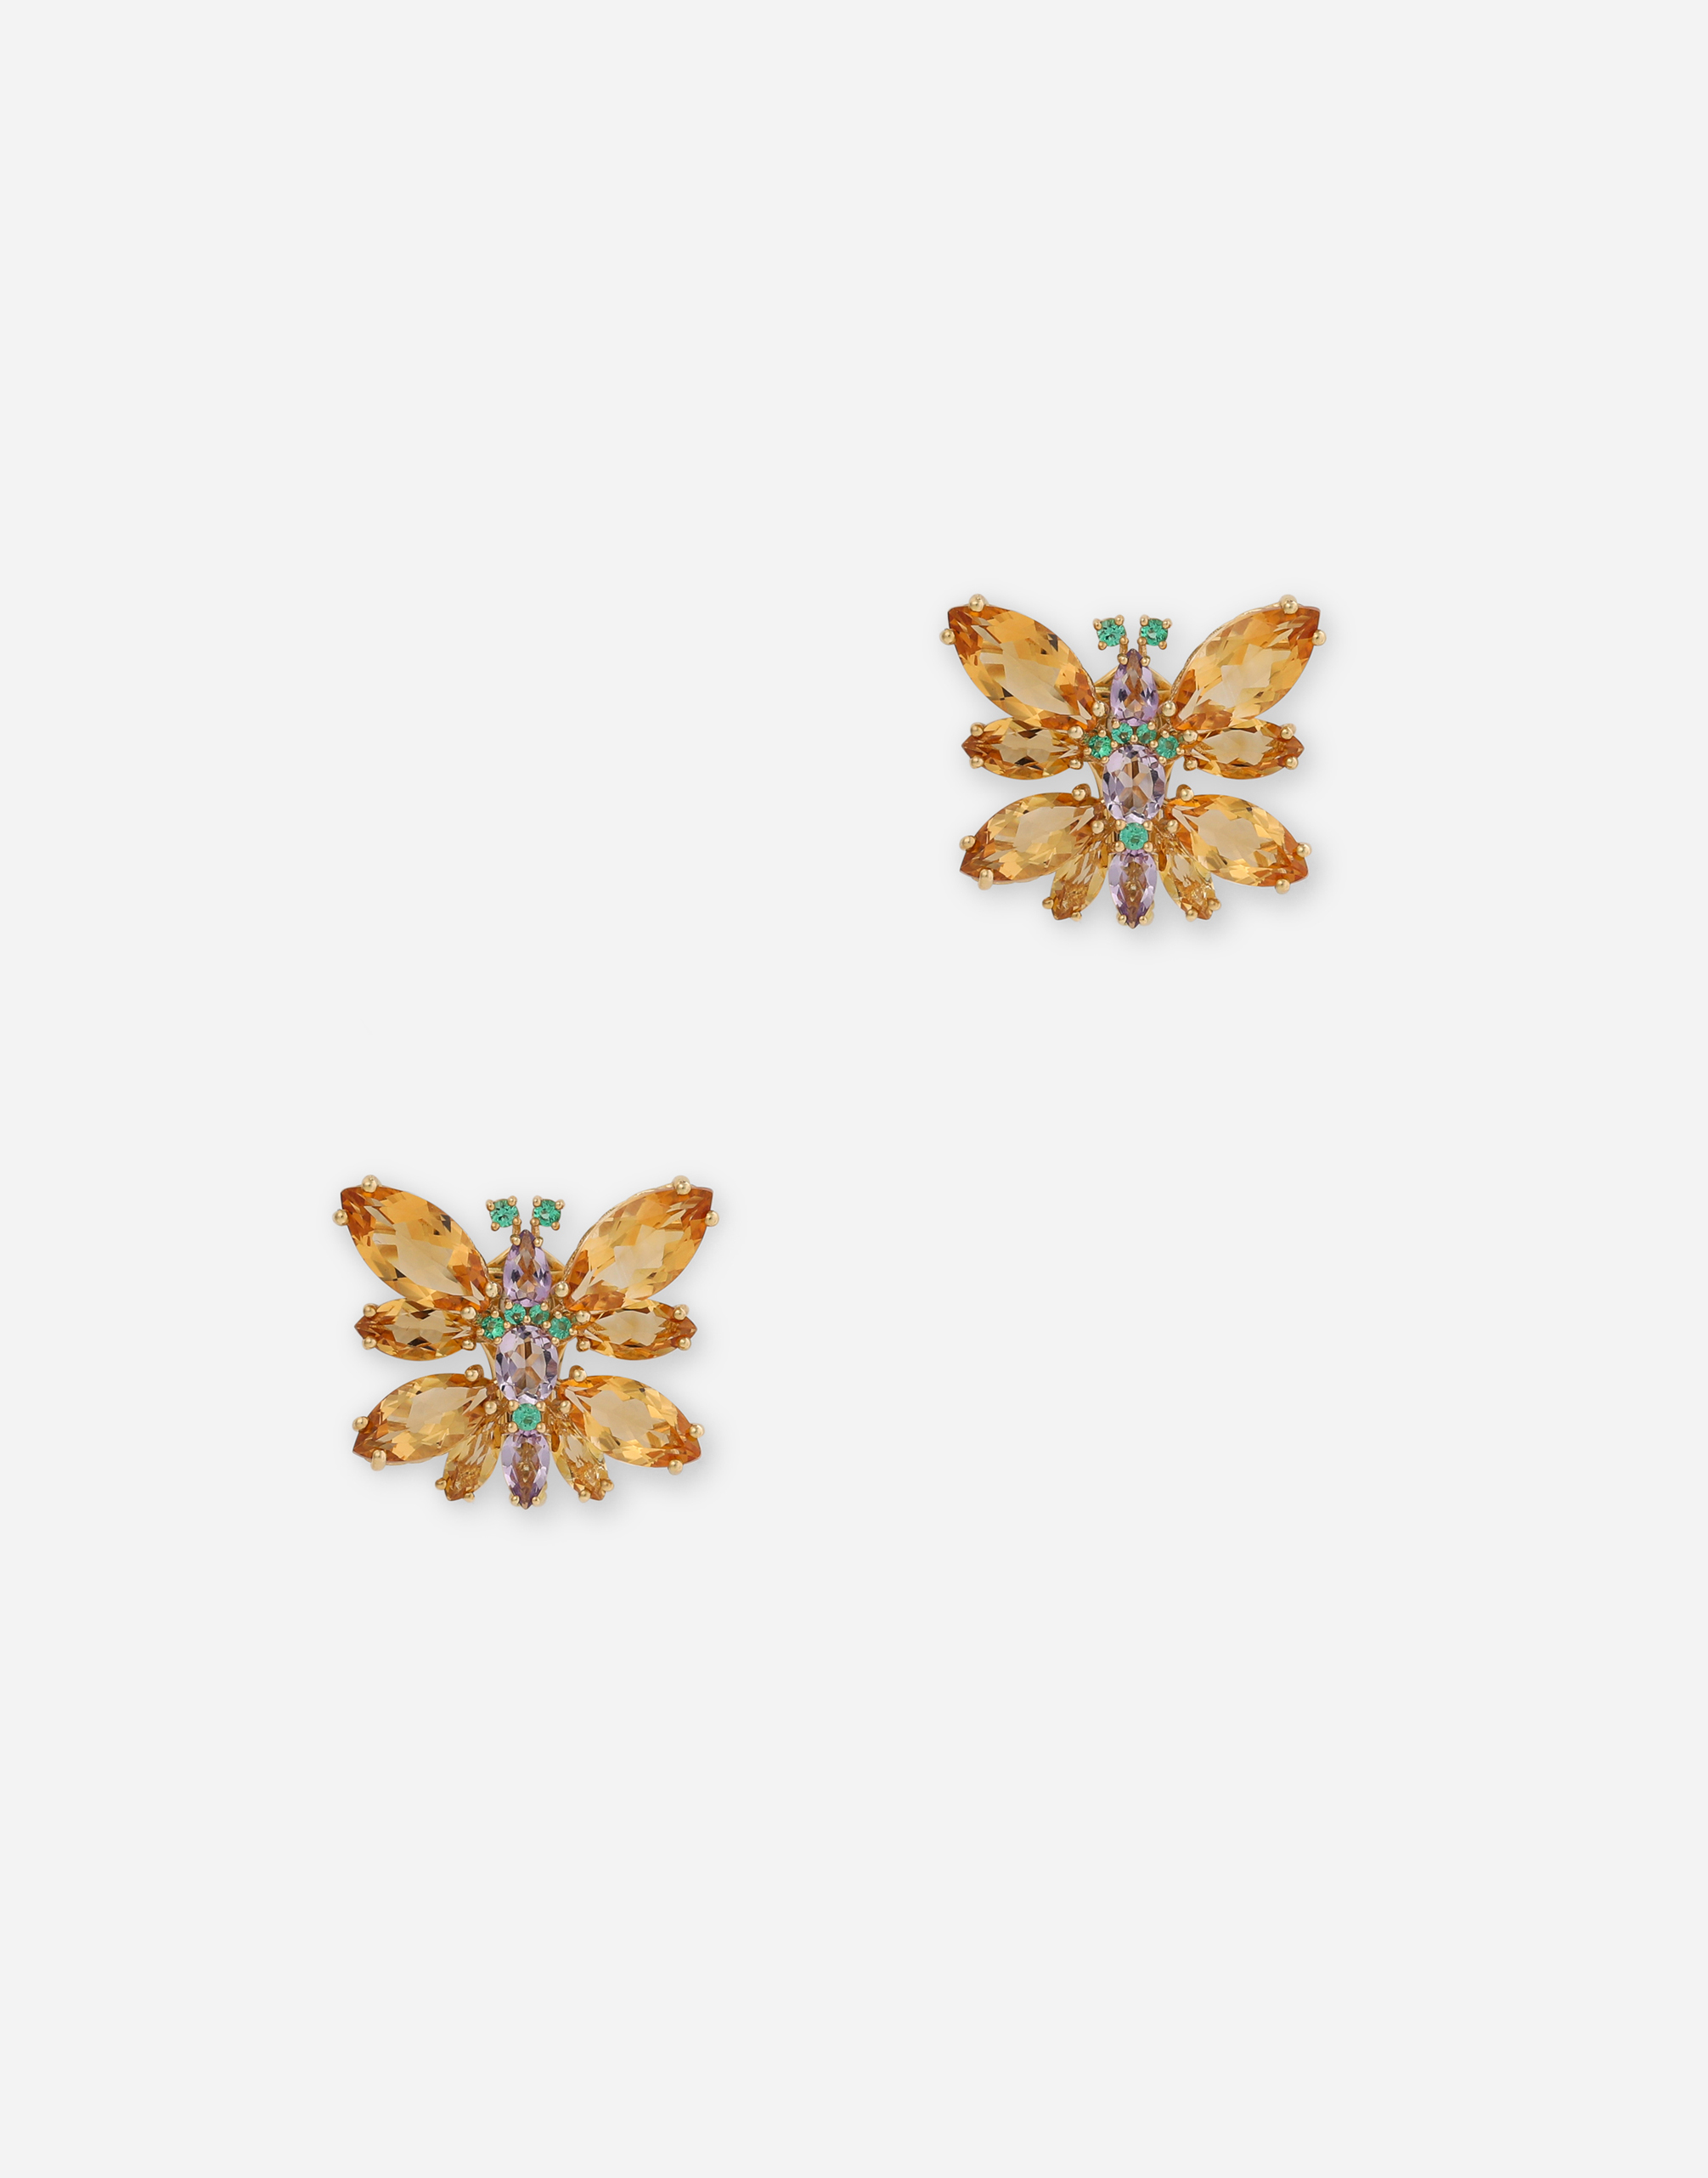 Spring earrings in yellow 18kt gold with citrine butterflies in Gold